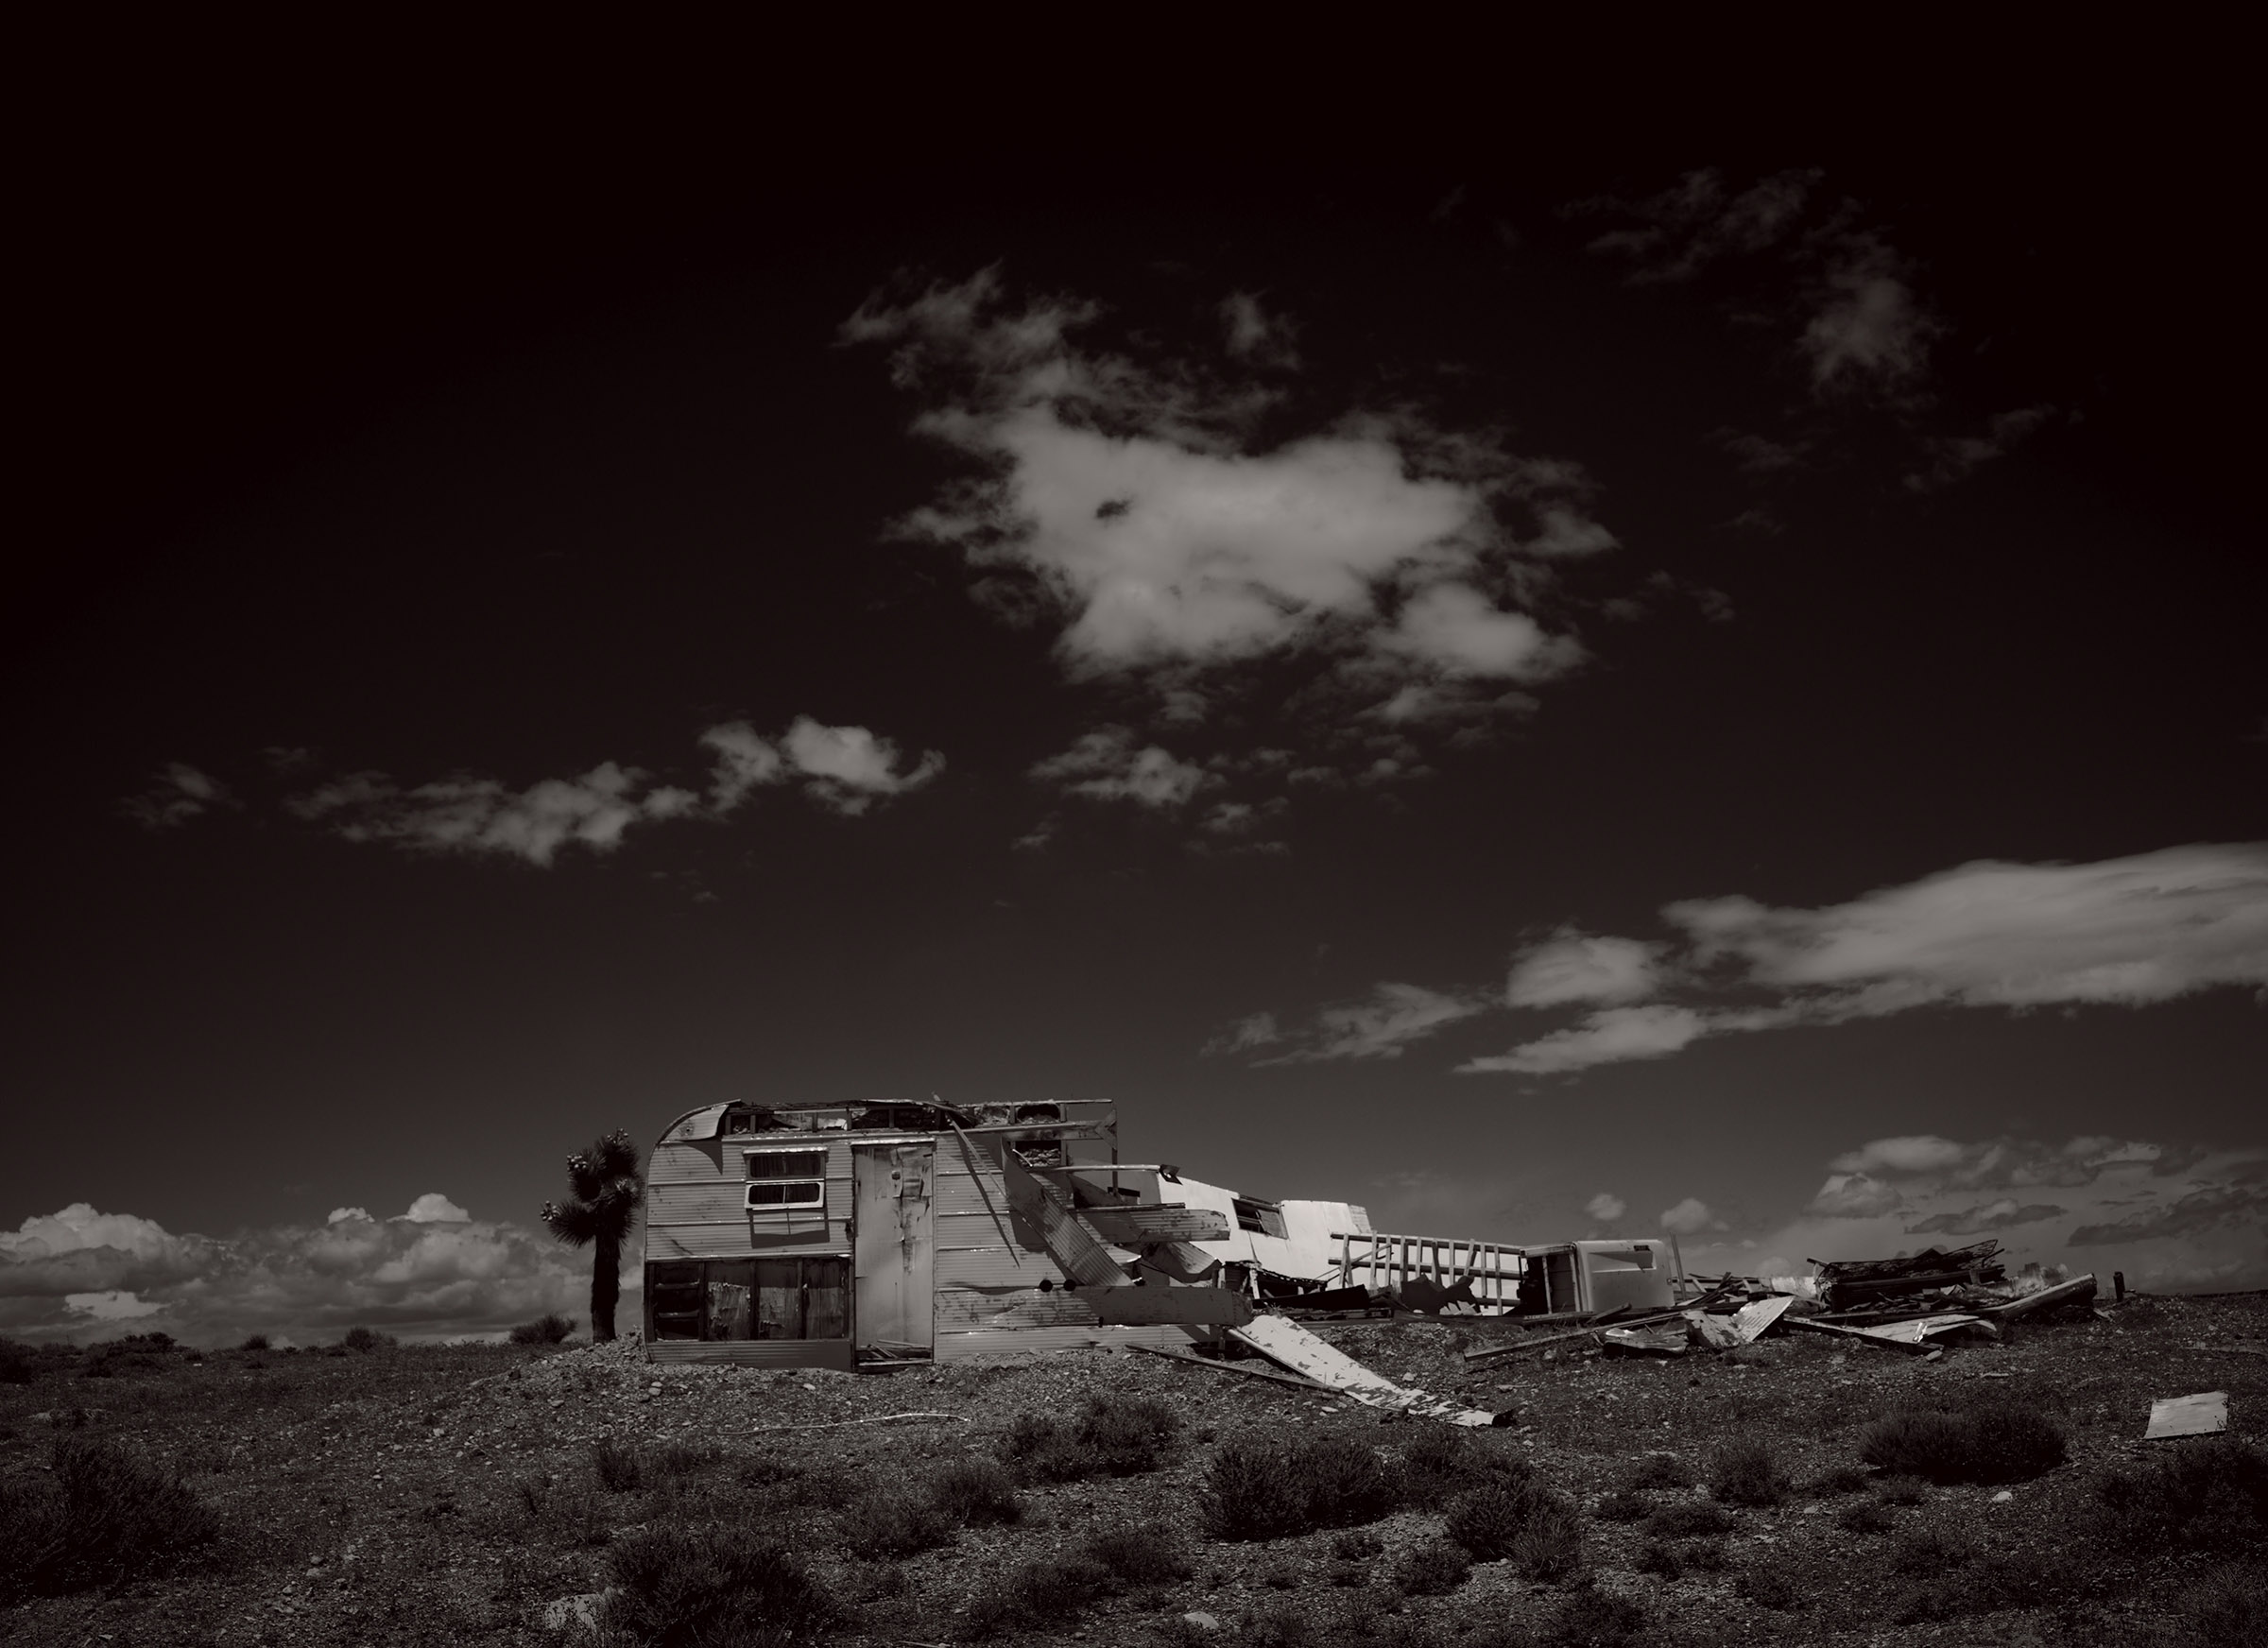 Goldfield NV Gold Mine Abandoned town gone Bust 250 population Now Wick Beavers 3 Months in town Photographing architectura lImagery Black and White Fine art Photography best BW Fine art Portraiture Wick Beavers NYC LA